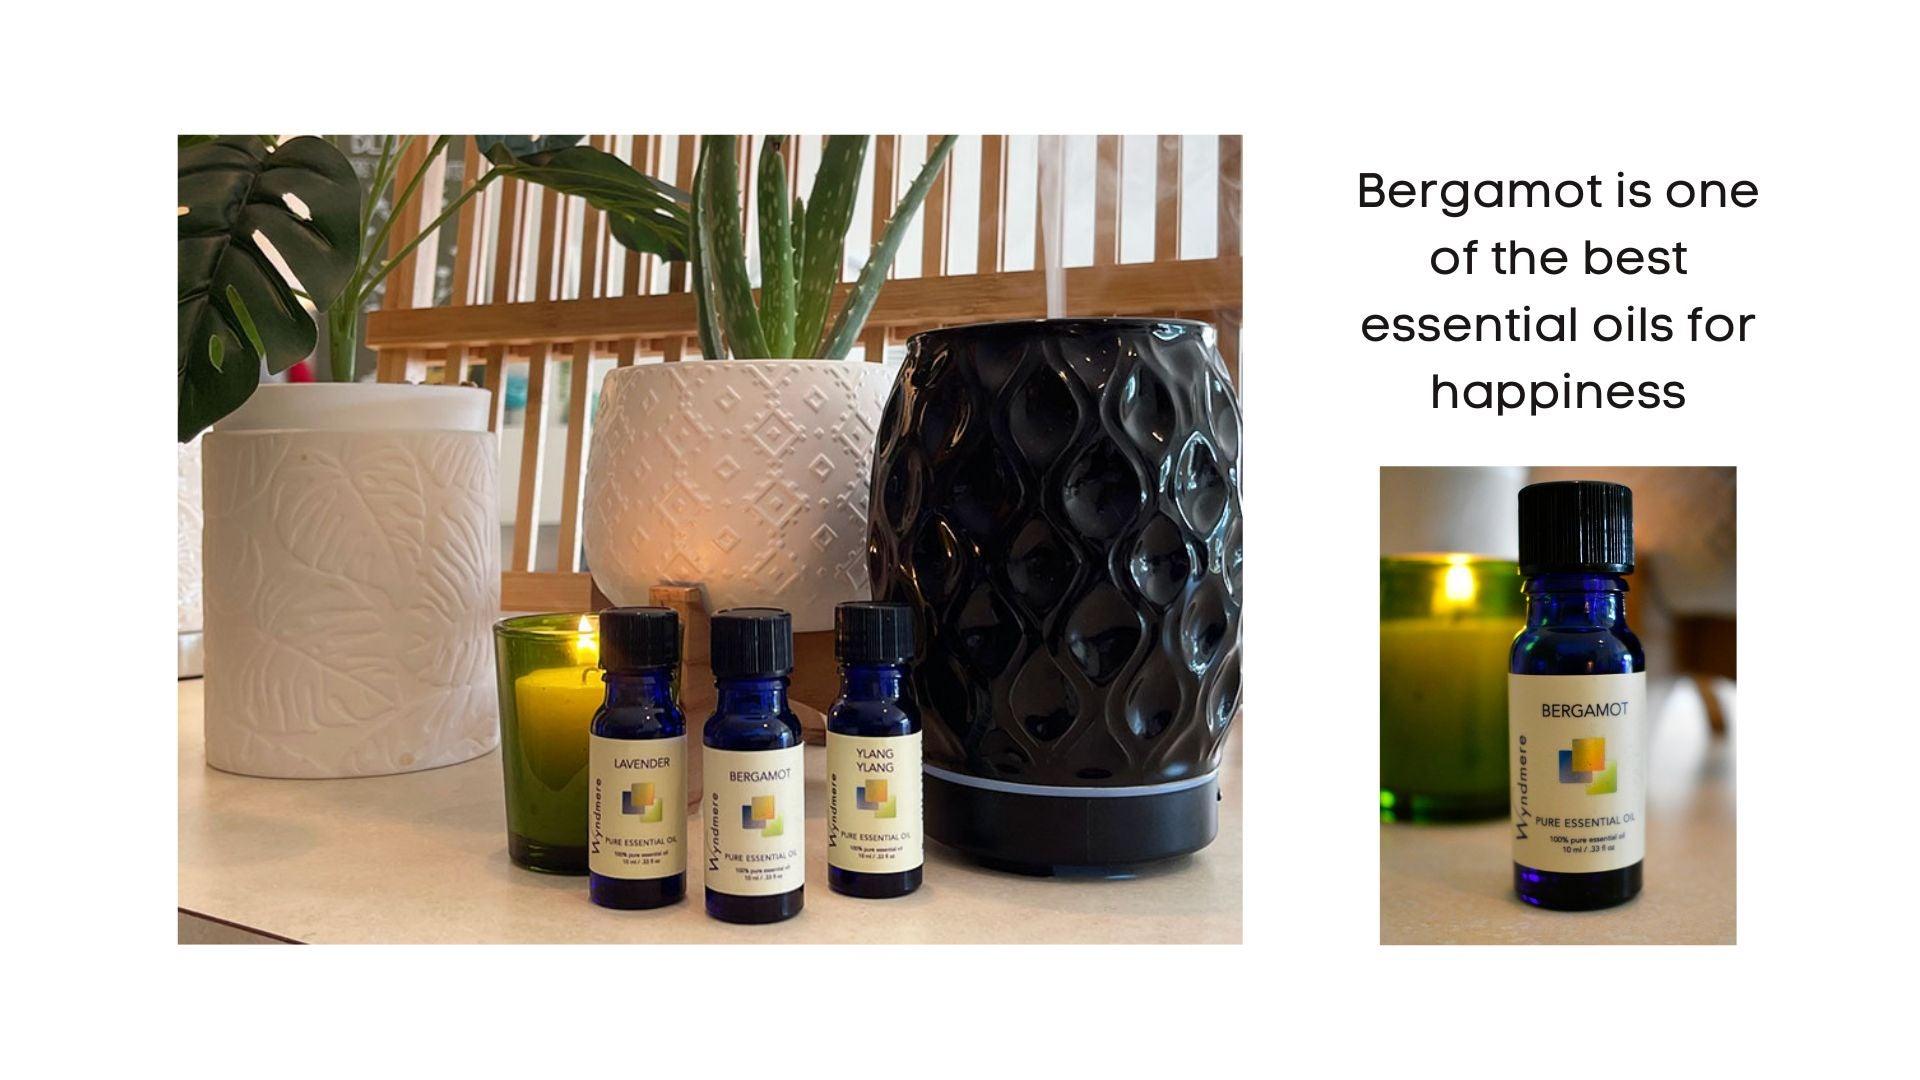 Bergamot essential oil for happiness with AromaVase diffuser